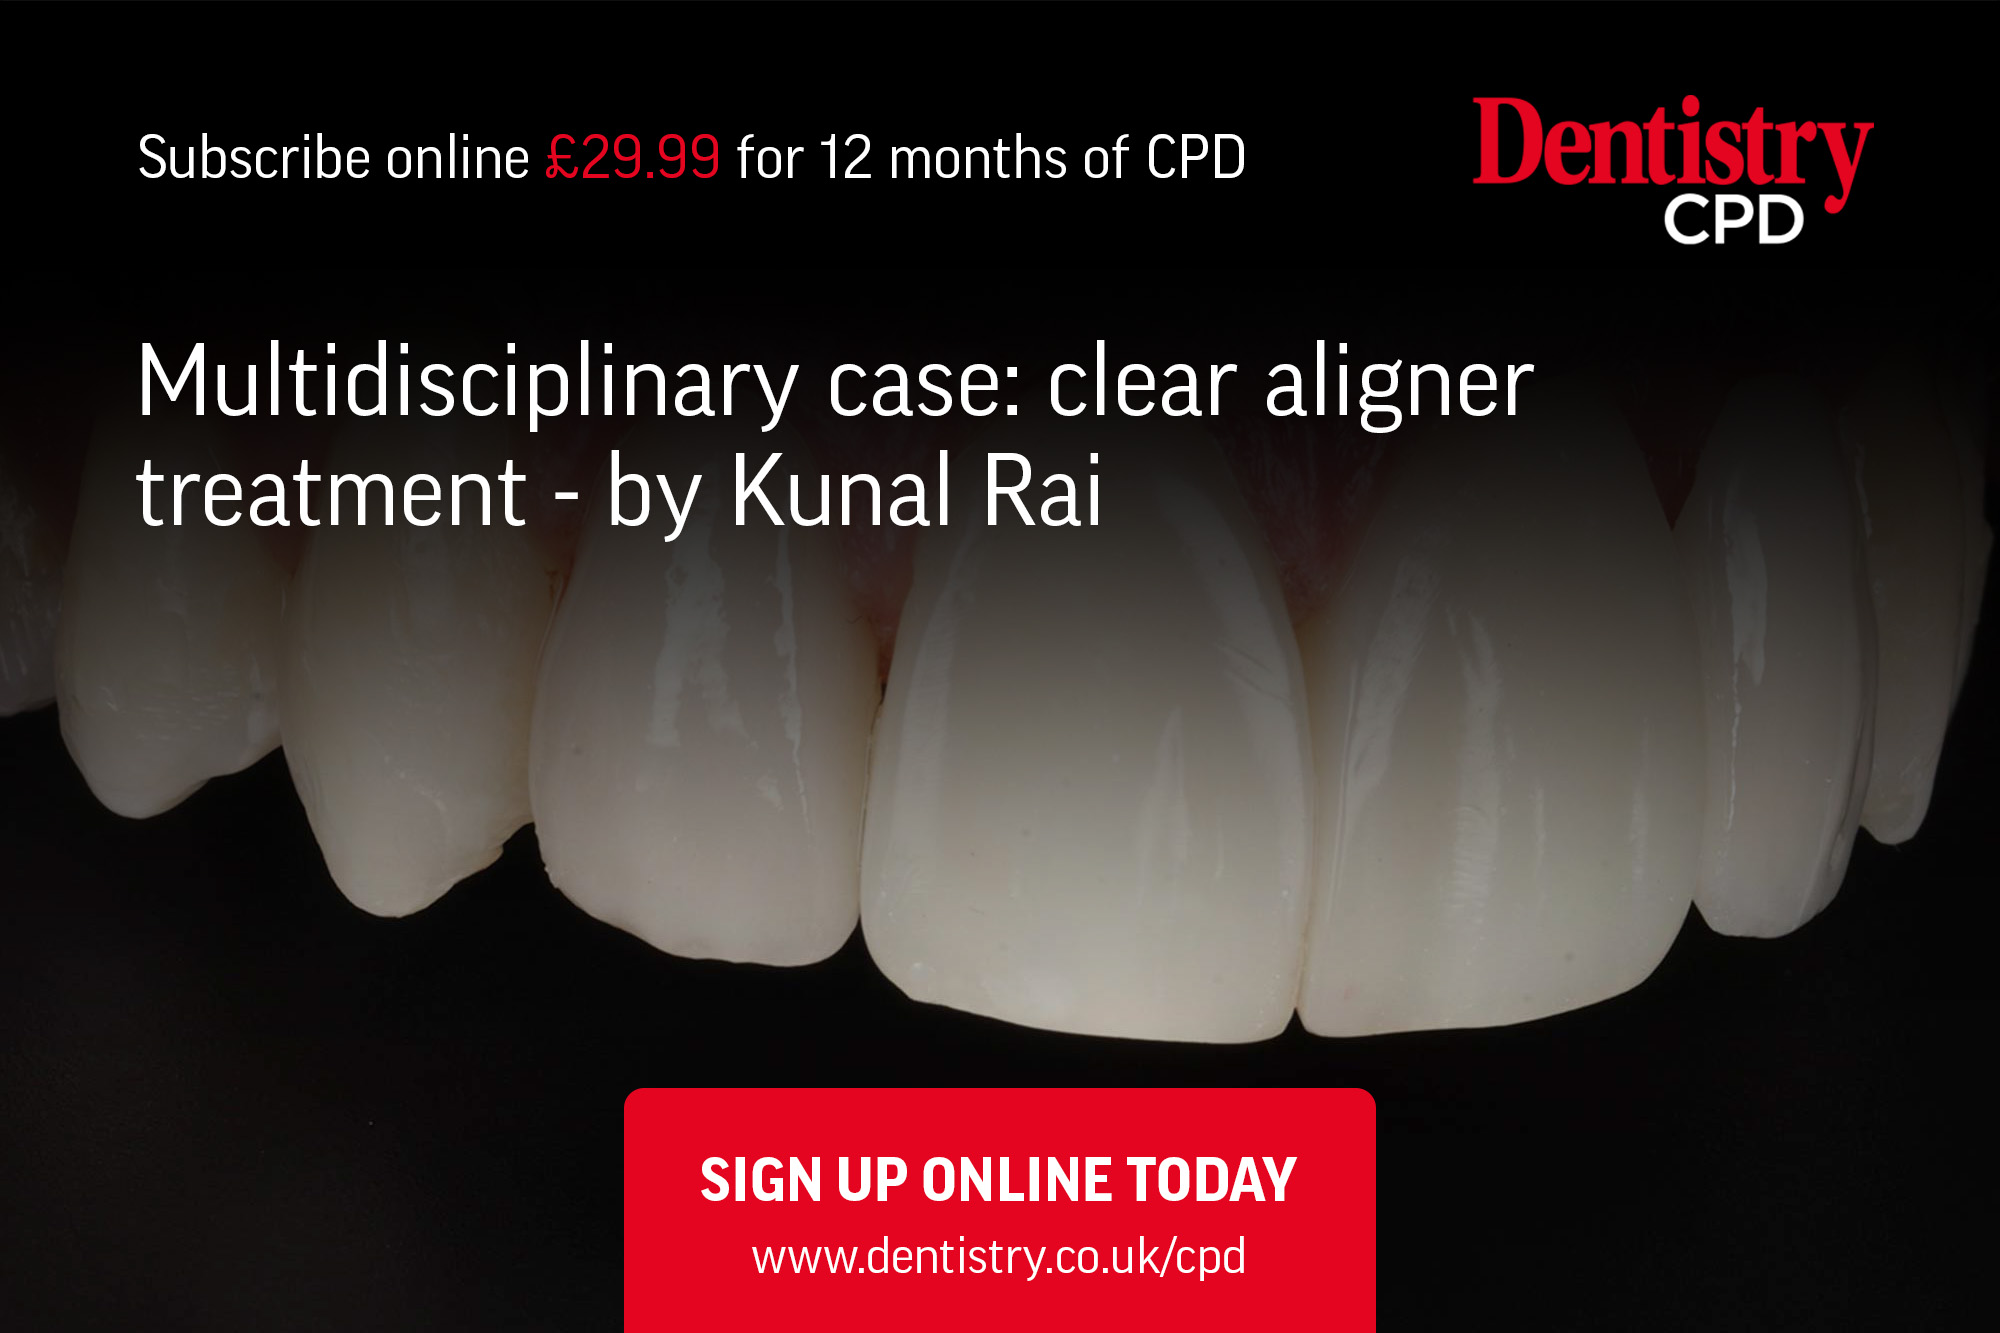 Kunal Rai presents a multidisciplinary case highlighting how careful case selection, assessment and treatment planning can provide an excellent outcome for patients using the Invisalign system.